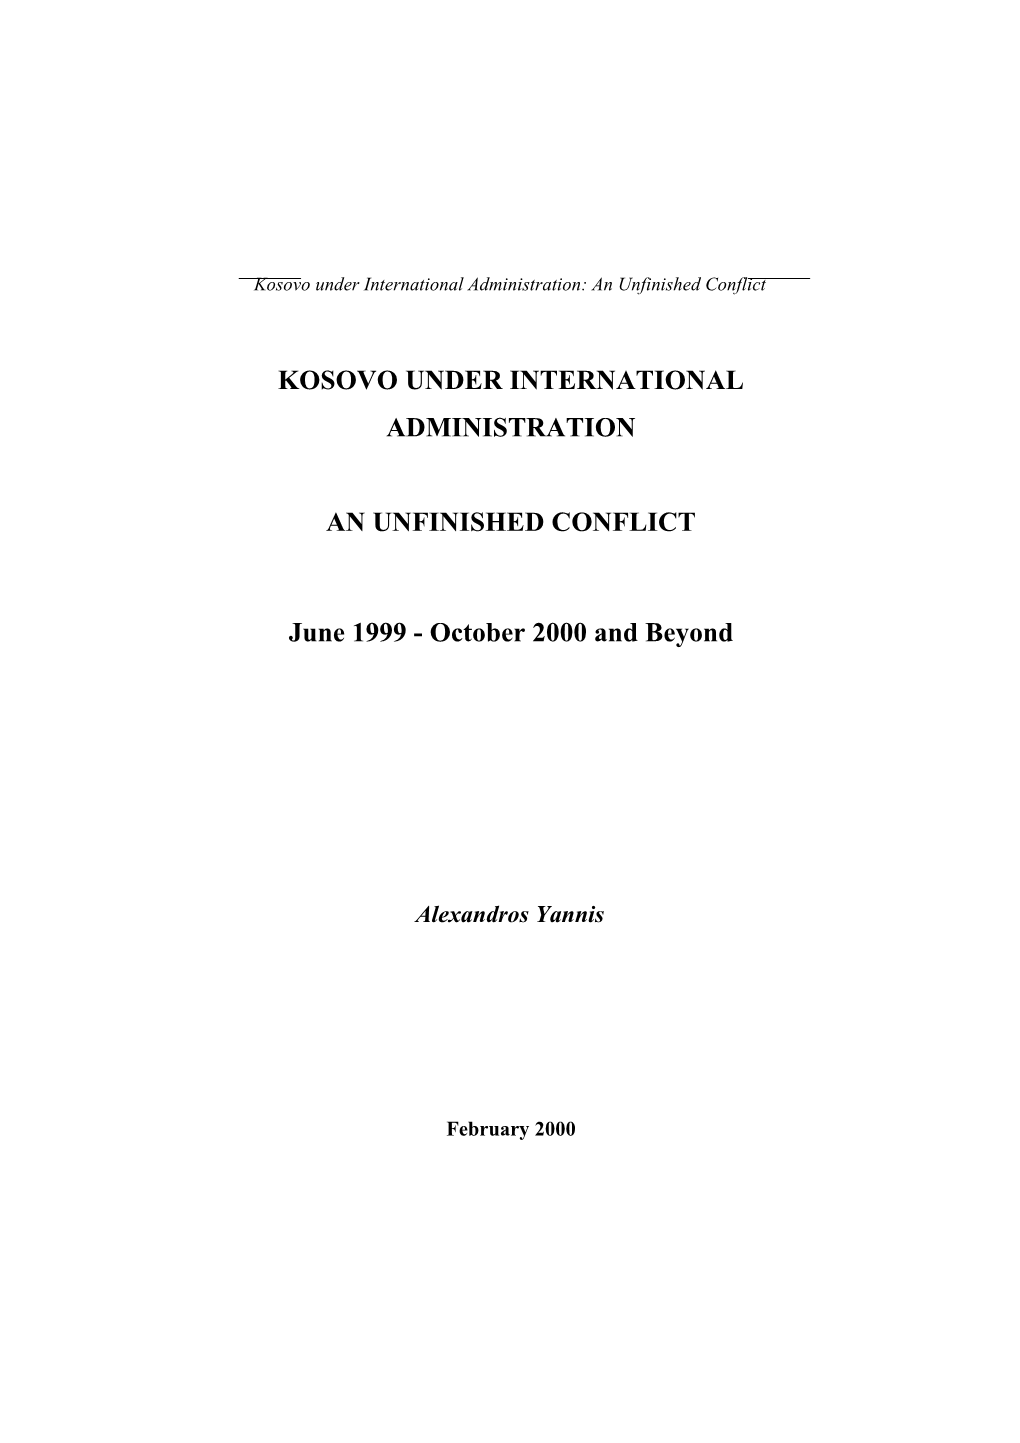 The International Presence in Kosovo and Regional Security